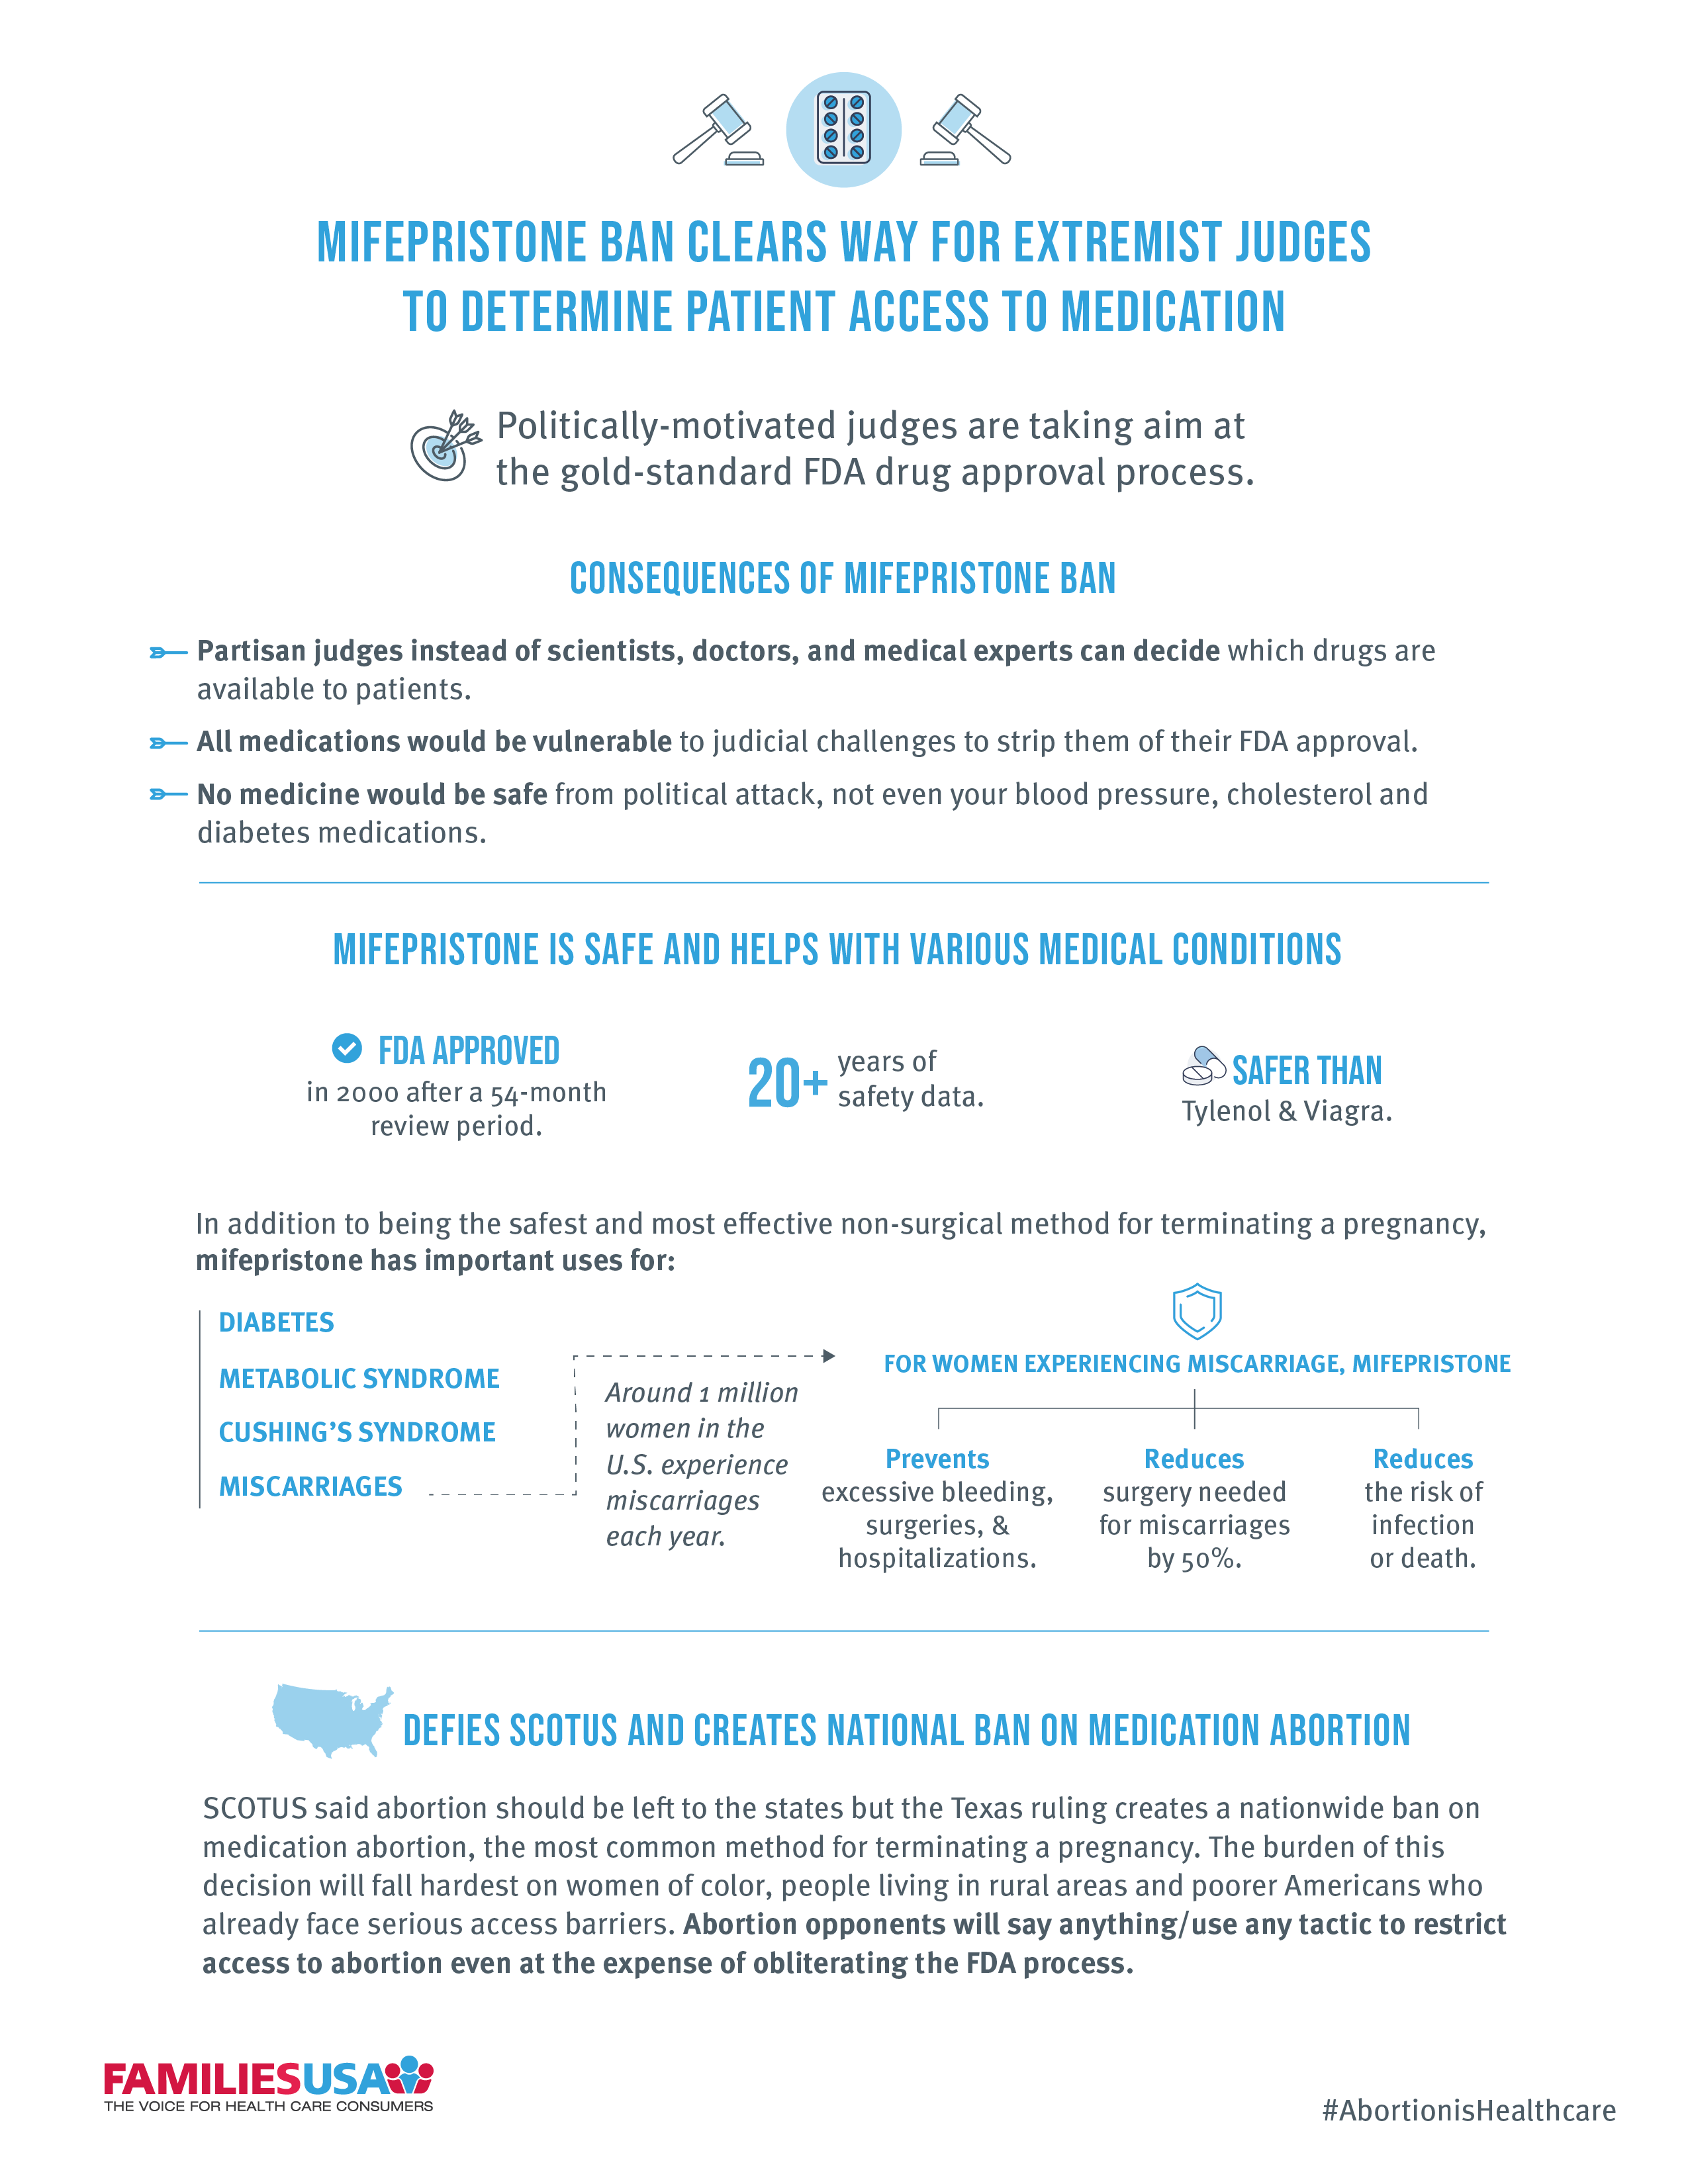 https://familiesusa.org/wp-content/uploads/2023/04/Mifepristone_Infographic_FINAL.png